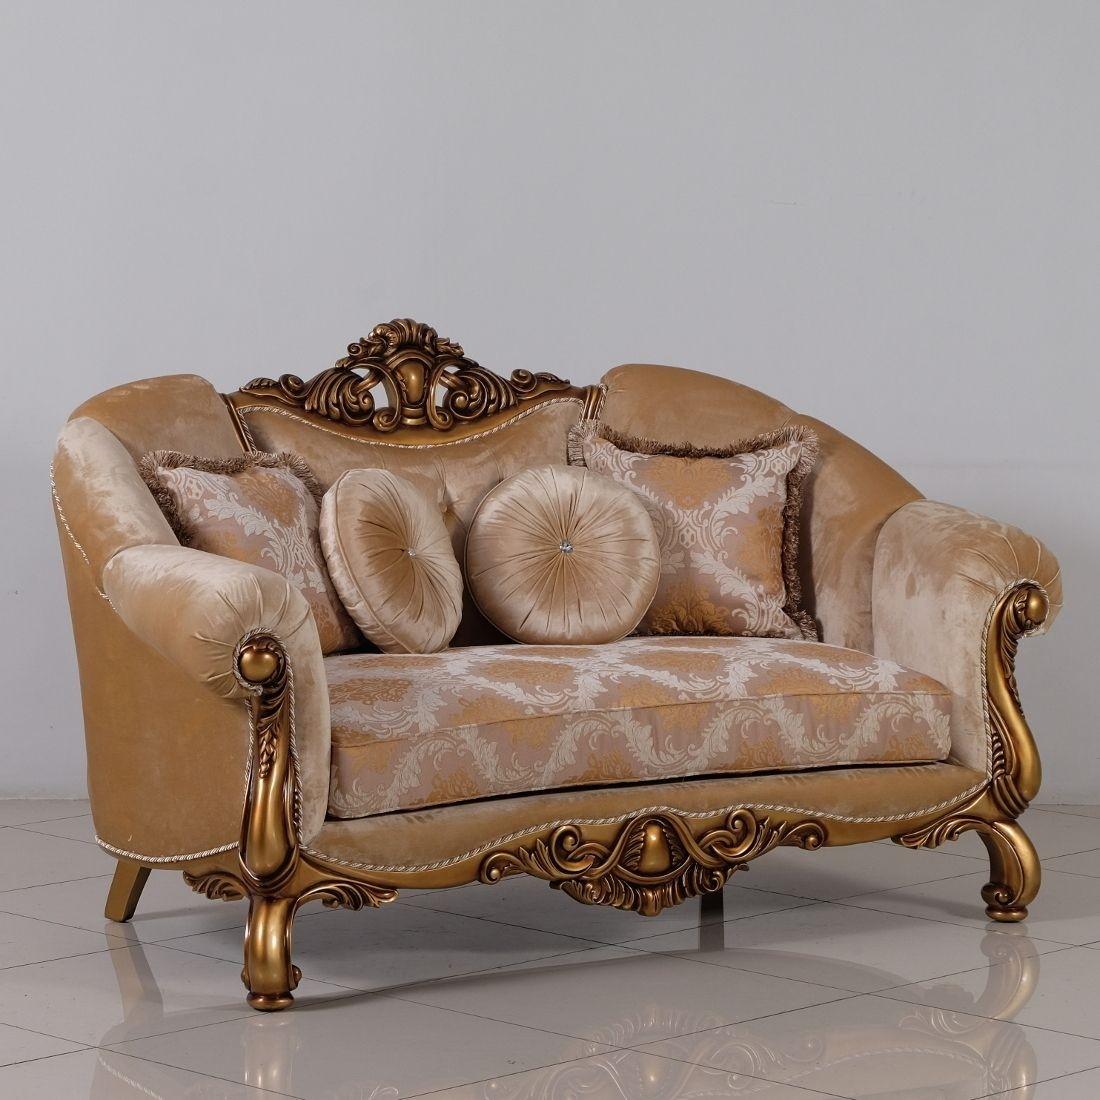 Classic, Traditional Loveseat GOLDEN KNIGHTS 4590-L in Gold, Bronze, Beige Fabric